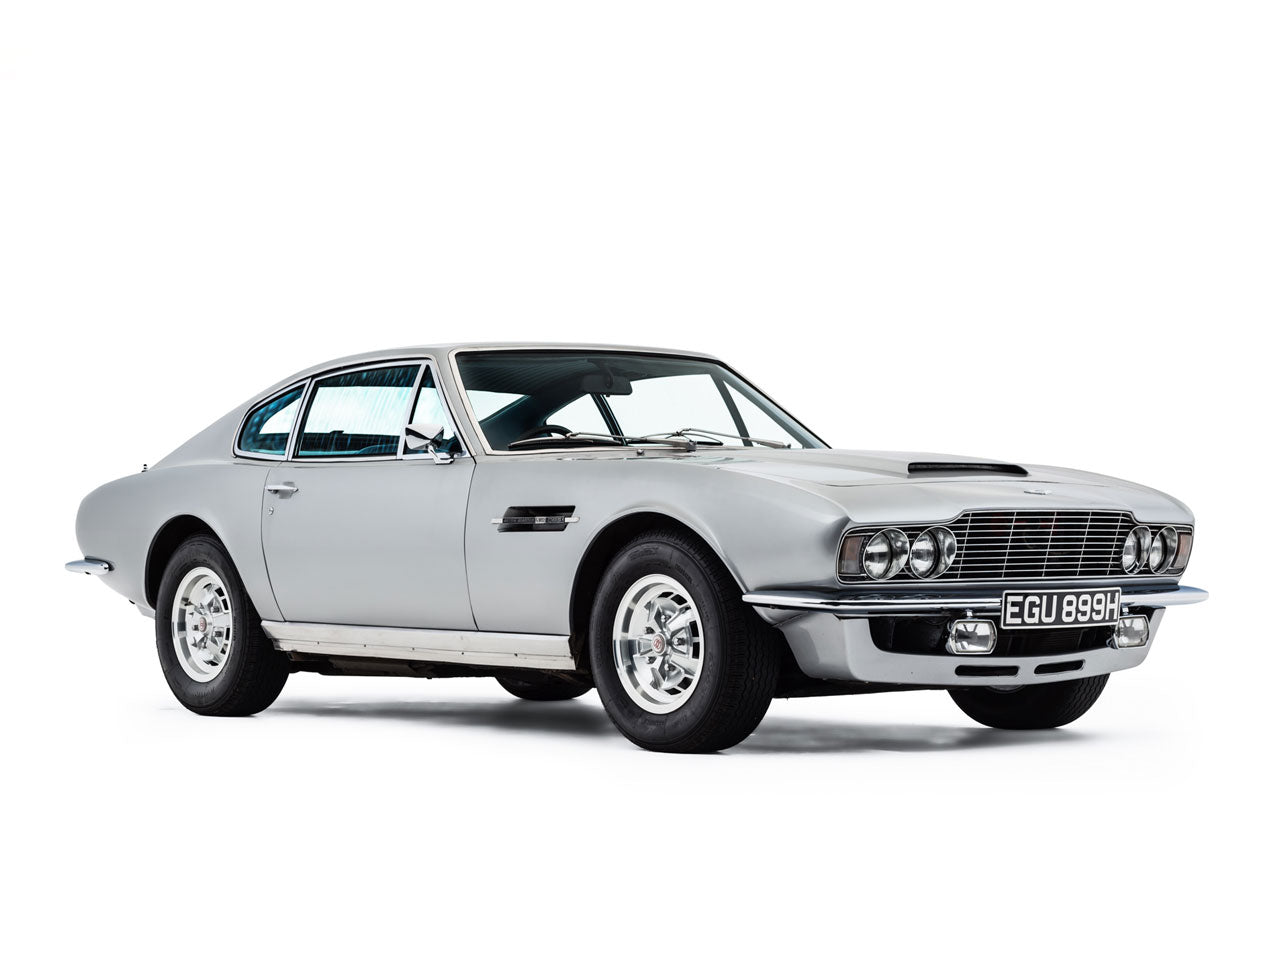 Aston Martin DBS V8 (Injection) Stainless Steel Exhaust (1969-72) - QuickSilver Exhausts